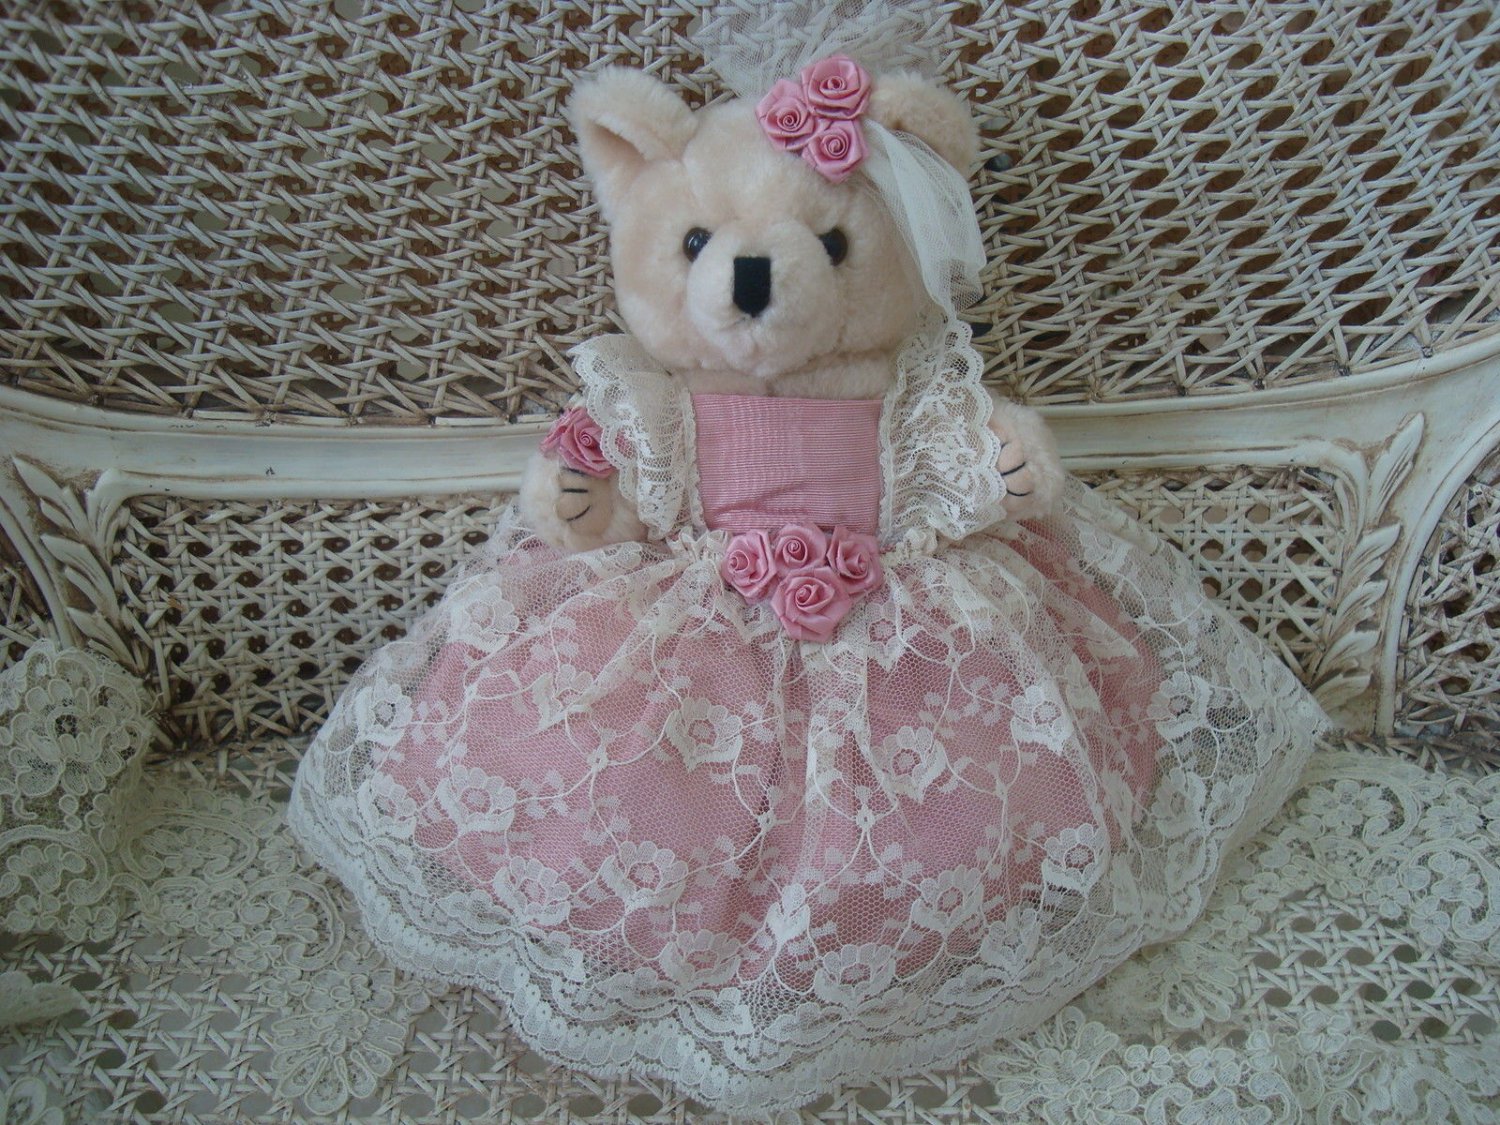 Beautiful Vintage 12 Tall Teddy Bear With Lace Dress And Rose Accents